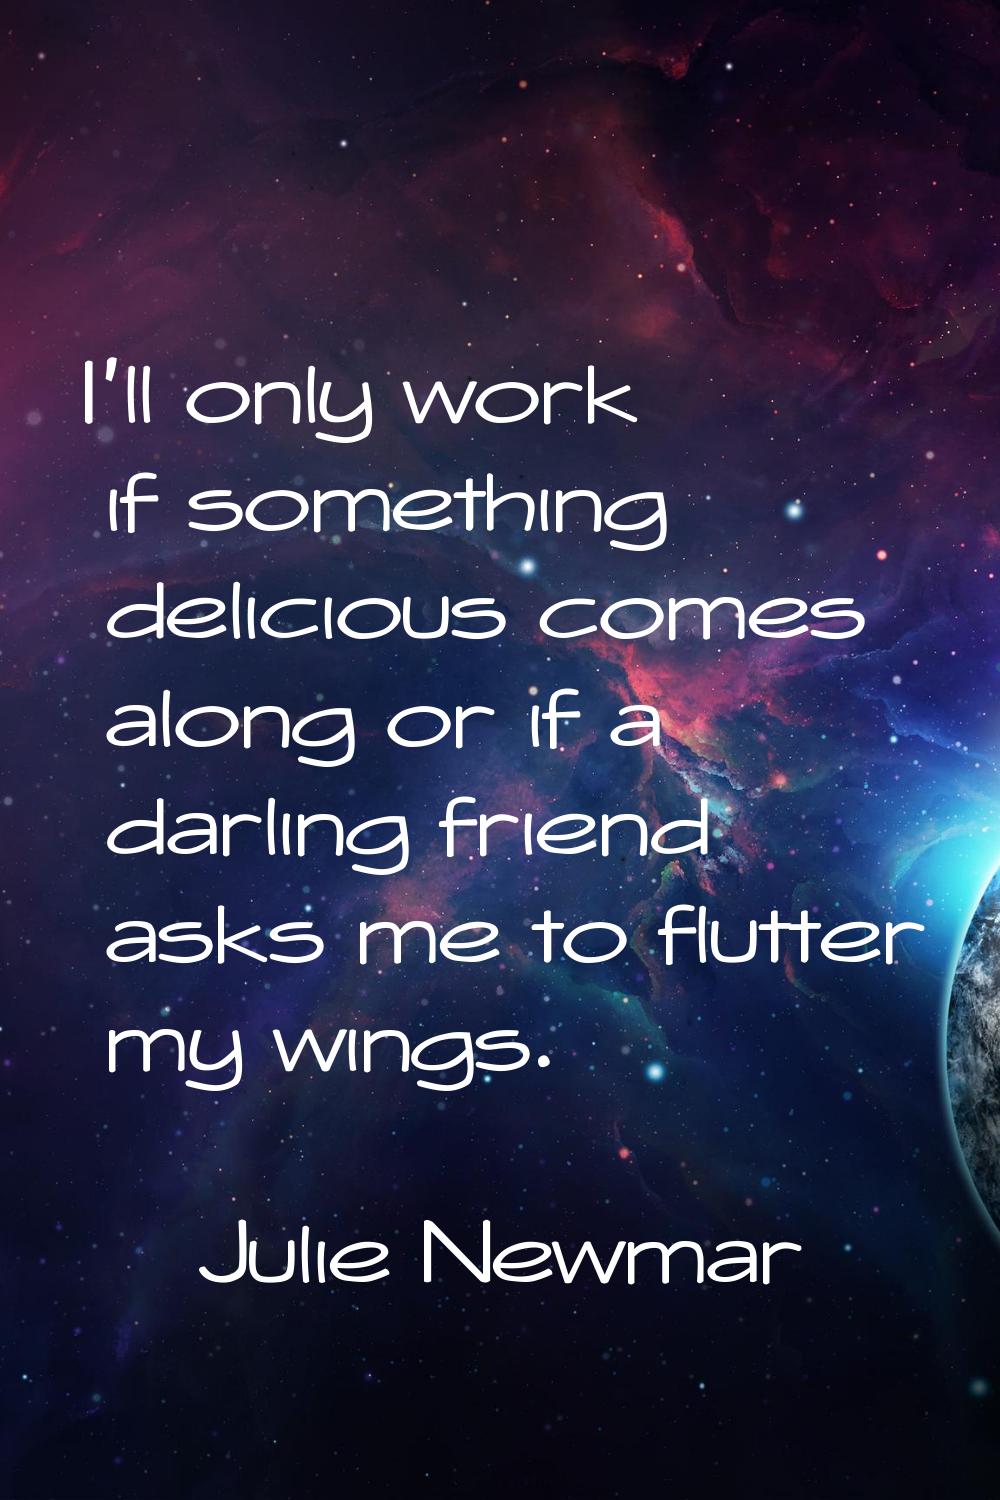 I'll only work if something delicious comes along or if a darling friend asks me to flutter my wing